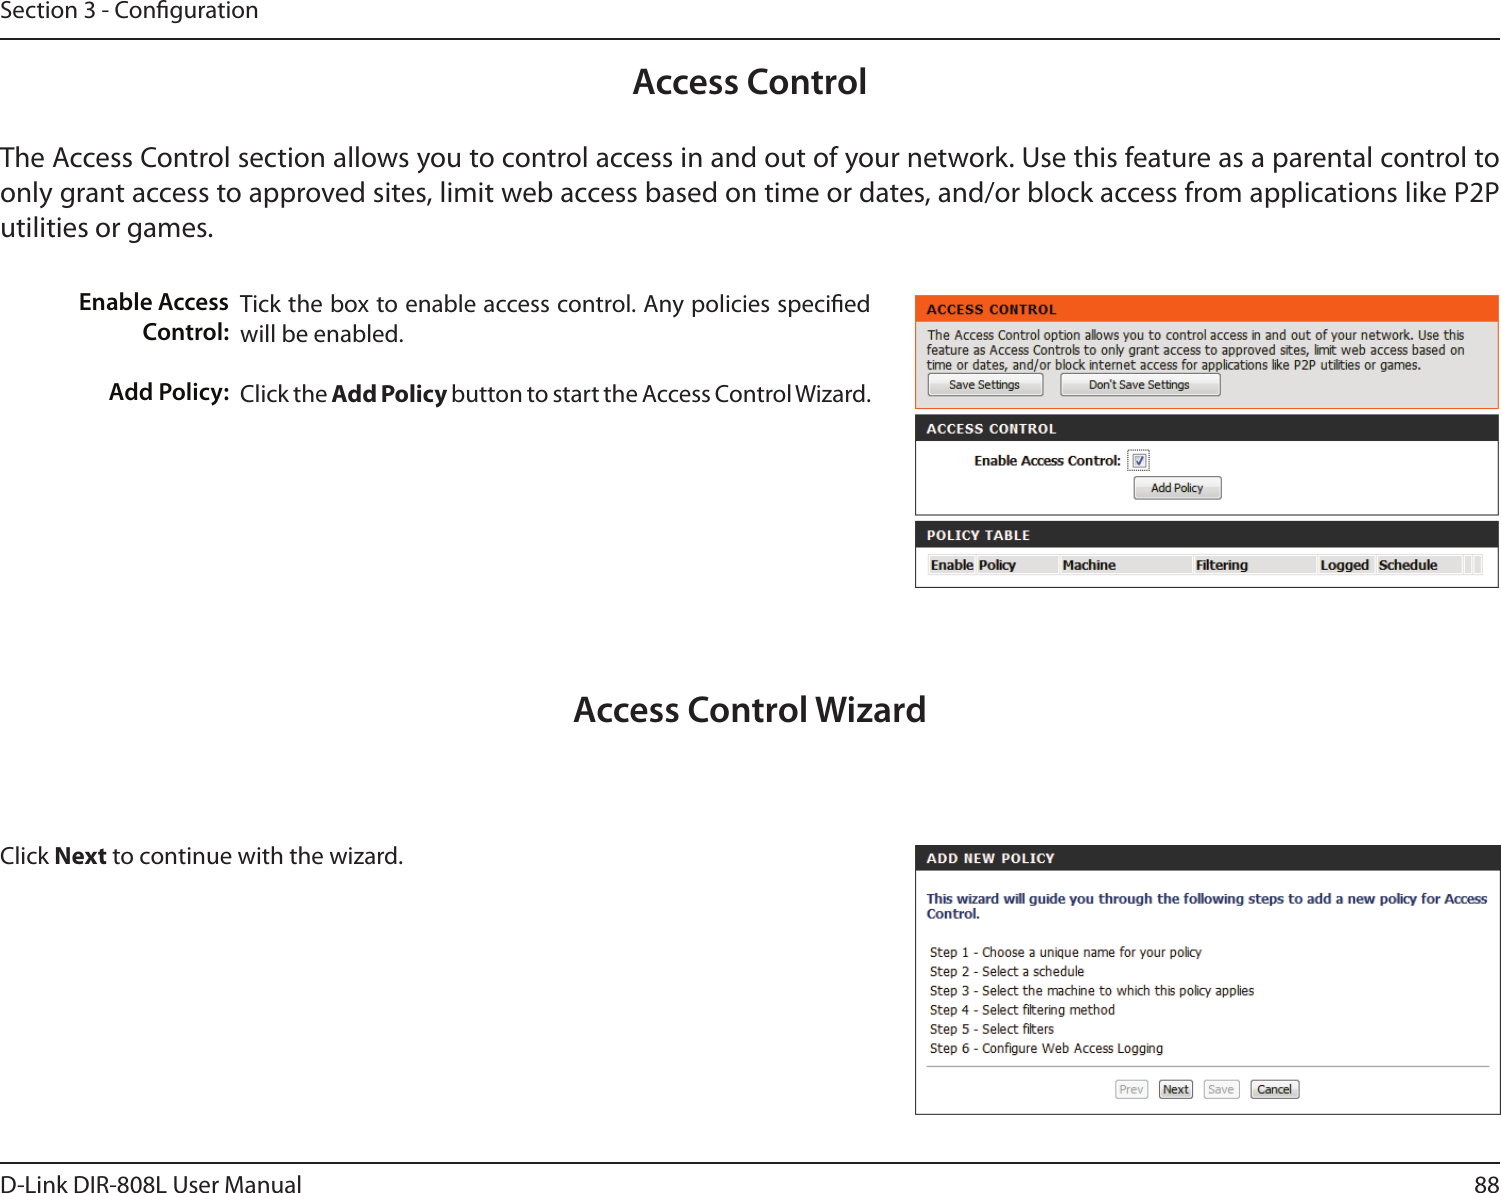 88D-Link DIR-808L User ManualSection 3 - CongurationAccess ControlTick the box to enable access control. Any policies specied will be enabled. Click the Add Policy button to start the Access Control Wizard. Enable Access Control:Add Policy:The Access Control section allows you to control access in and out of your network. Use this feature as a parental control to only grant access to approved sites, limit web access based on time or dates, and/or block access from applications like P2P utilities or games.Click Next to continue with the wizard.Access Control Wizard